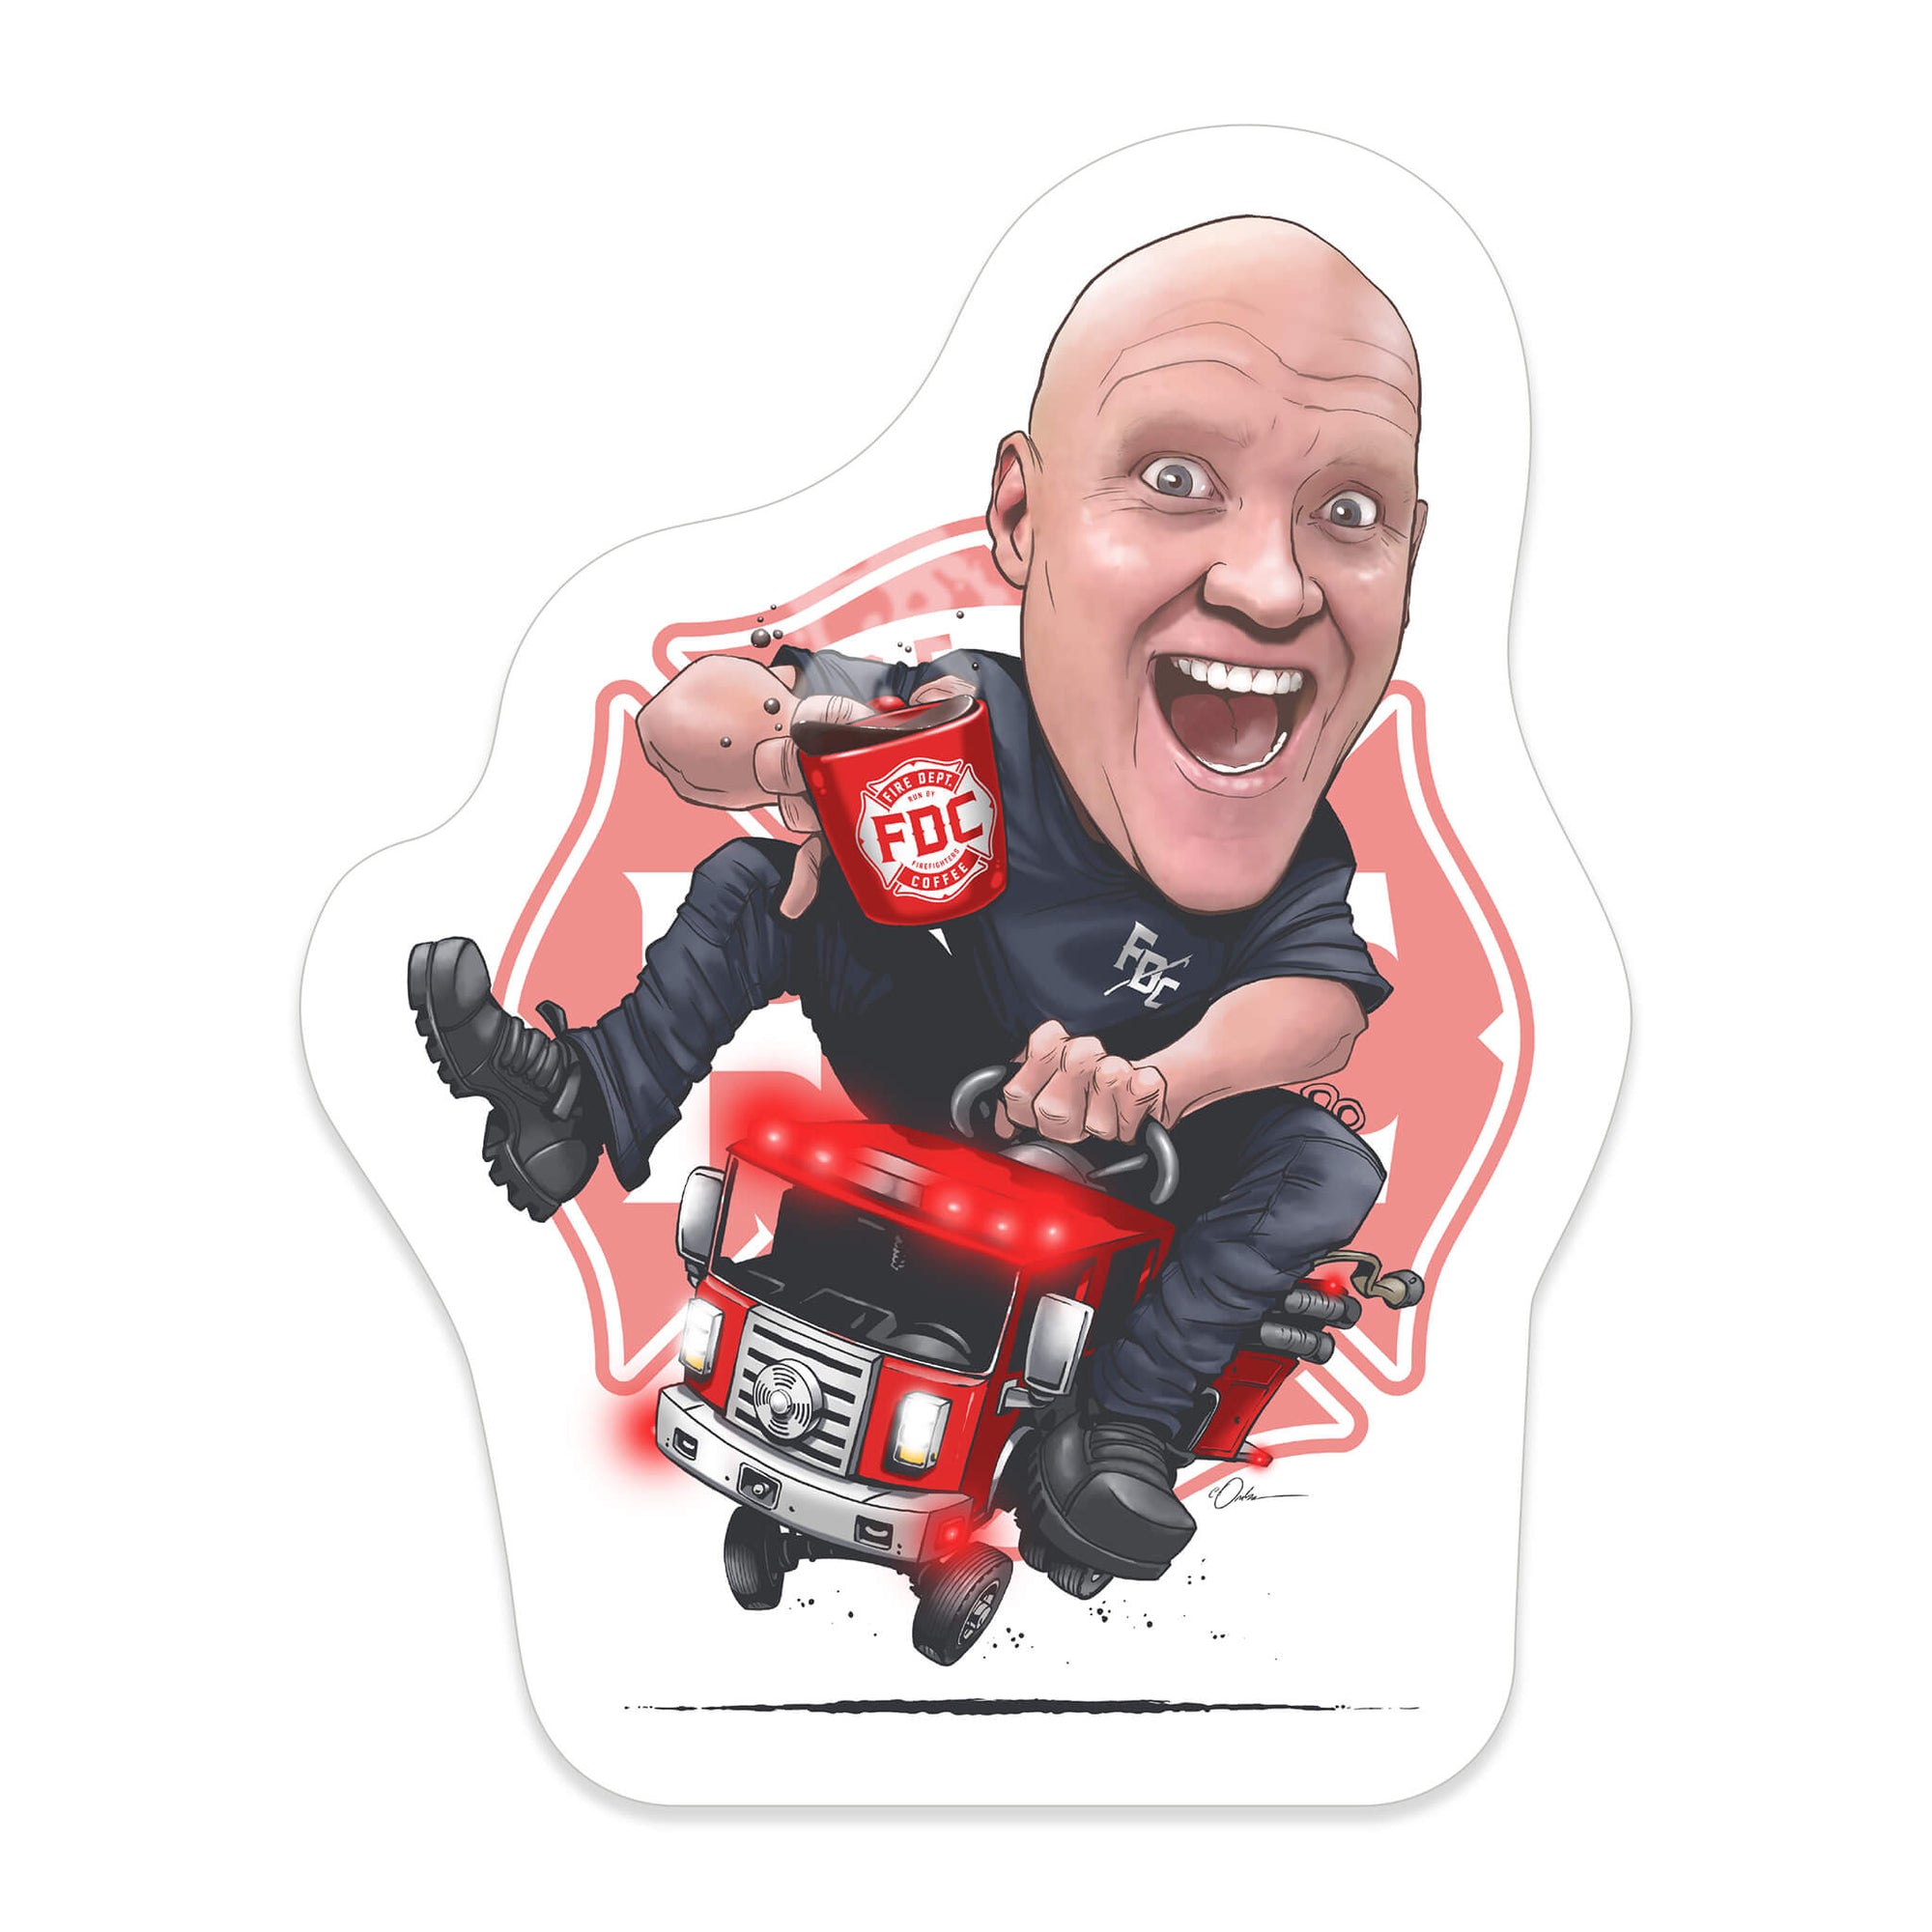 A sticker that shows Jason riding on a fire engine with an FDC coffee mug in hand and an FDC maltese cross logo behind him.